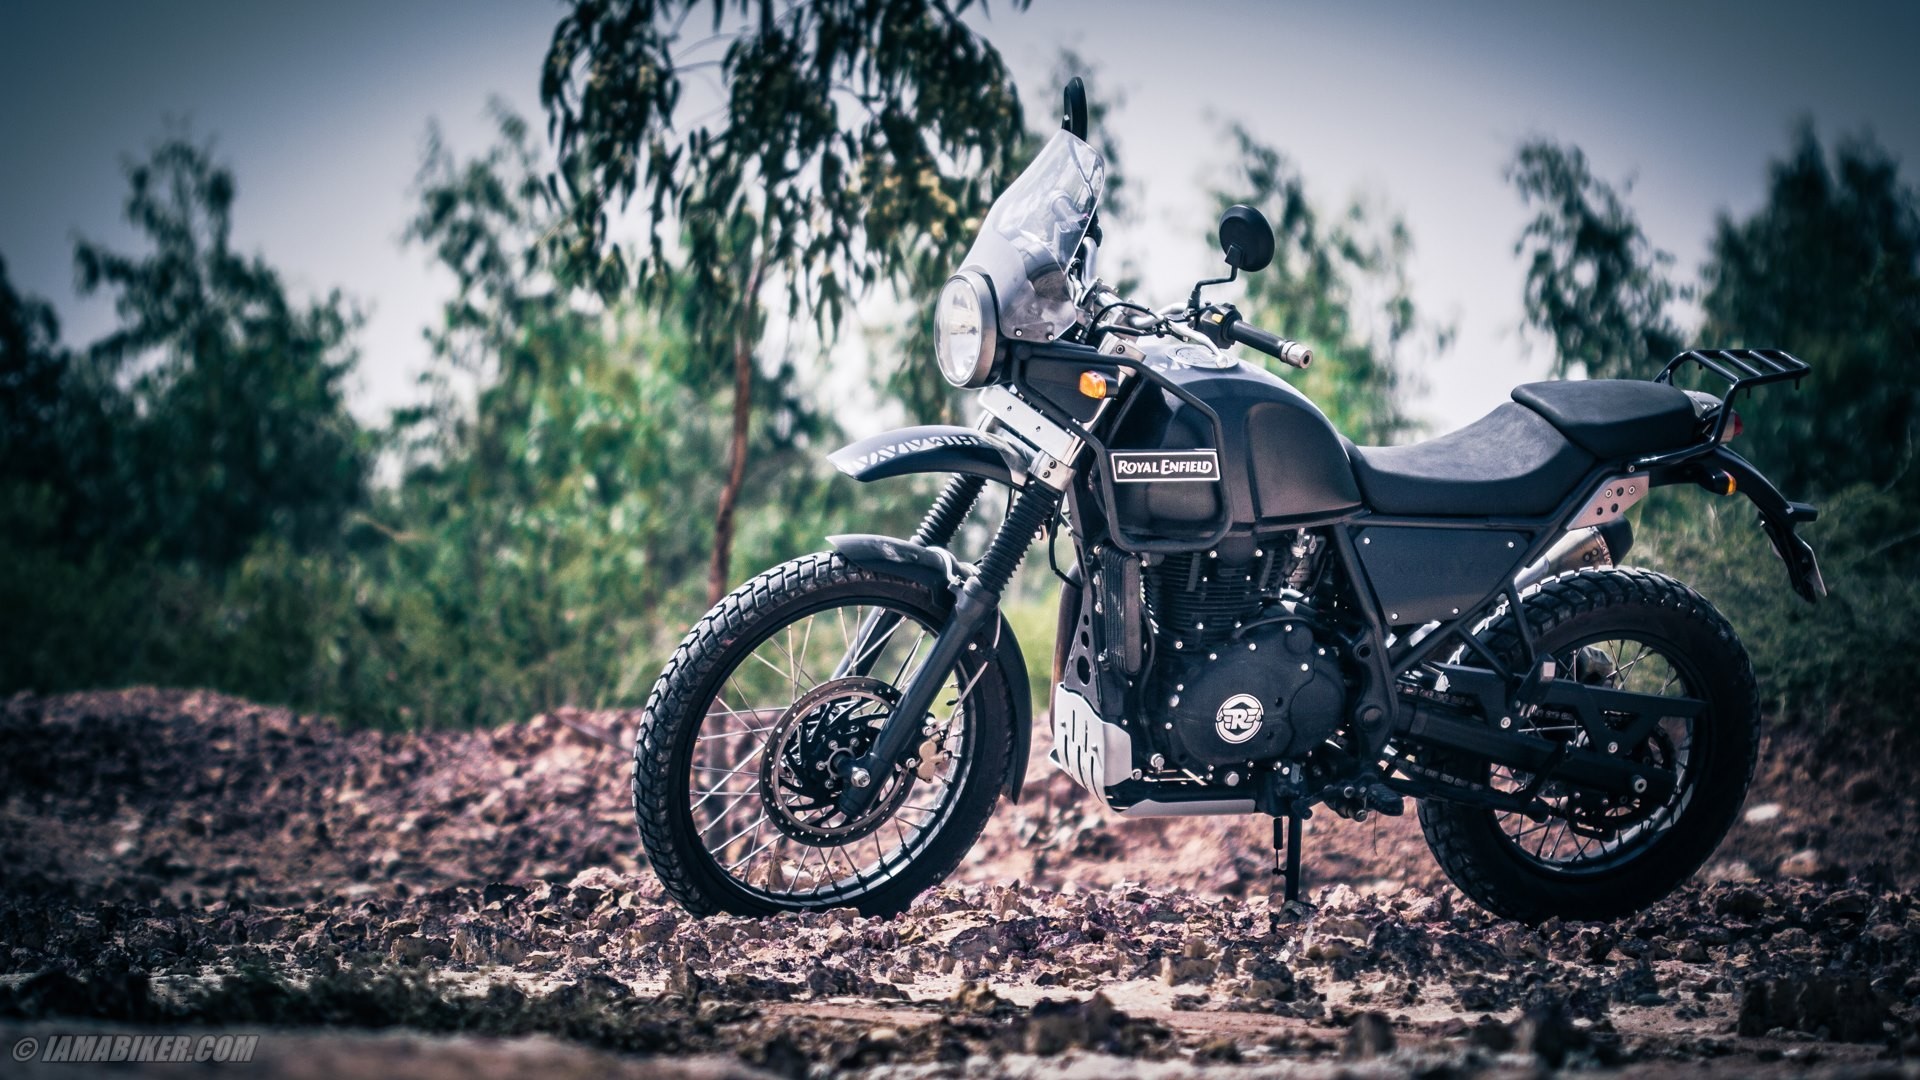 Royal Enfield Wallpapers (67+ images)